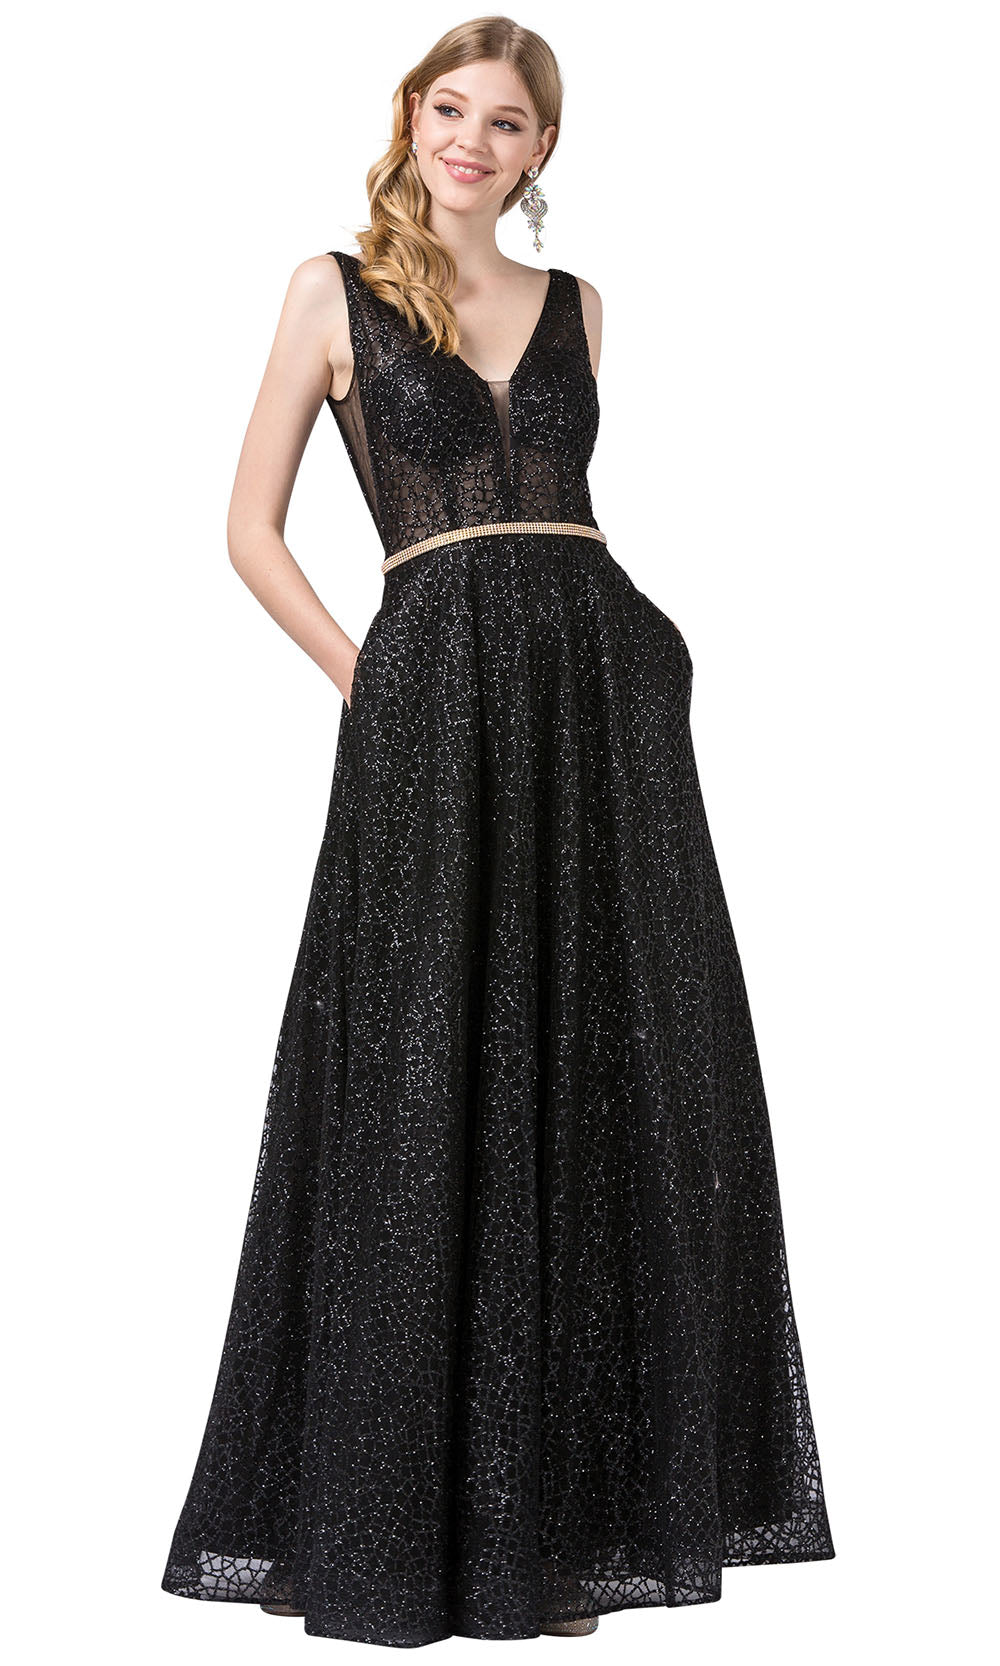 Dancing Queen - 2593 Illusion Bodice Glitter Mesh A-Line Gown In Black